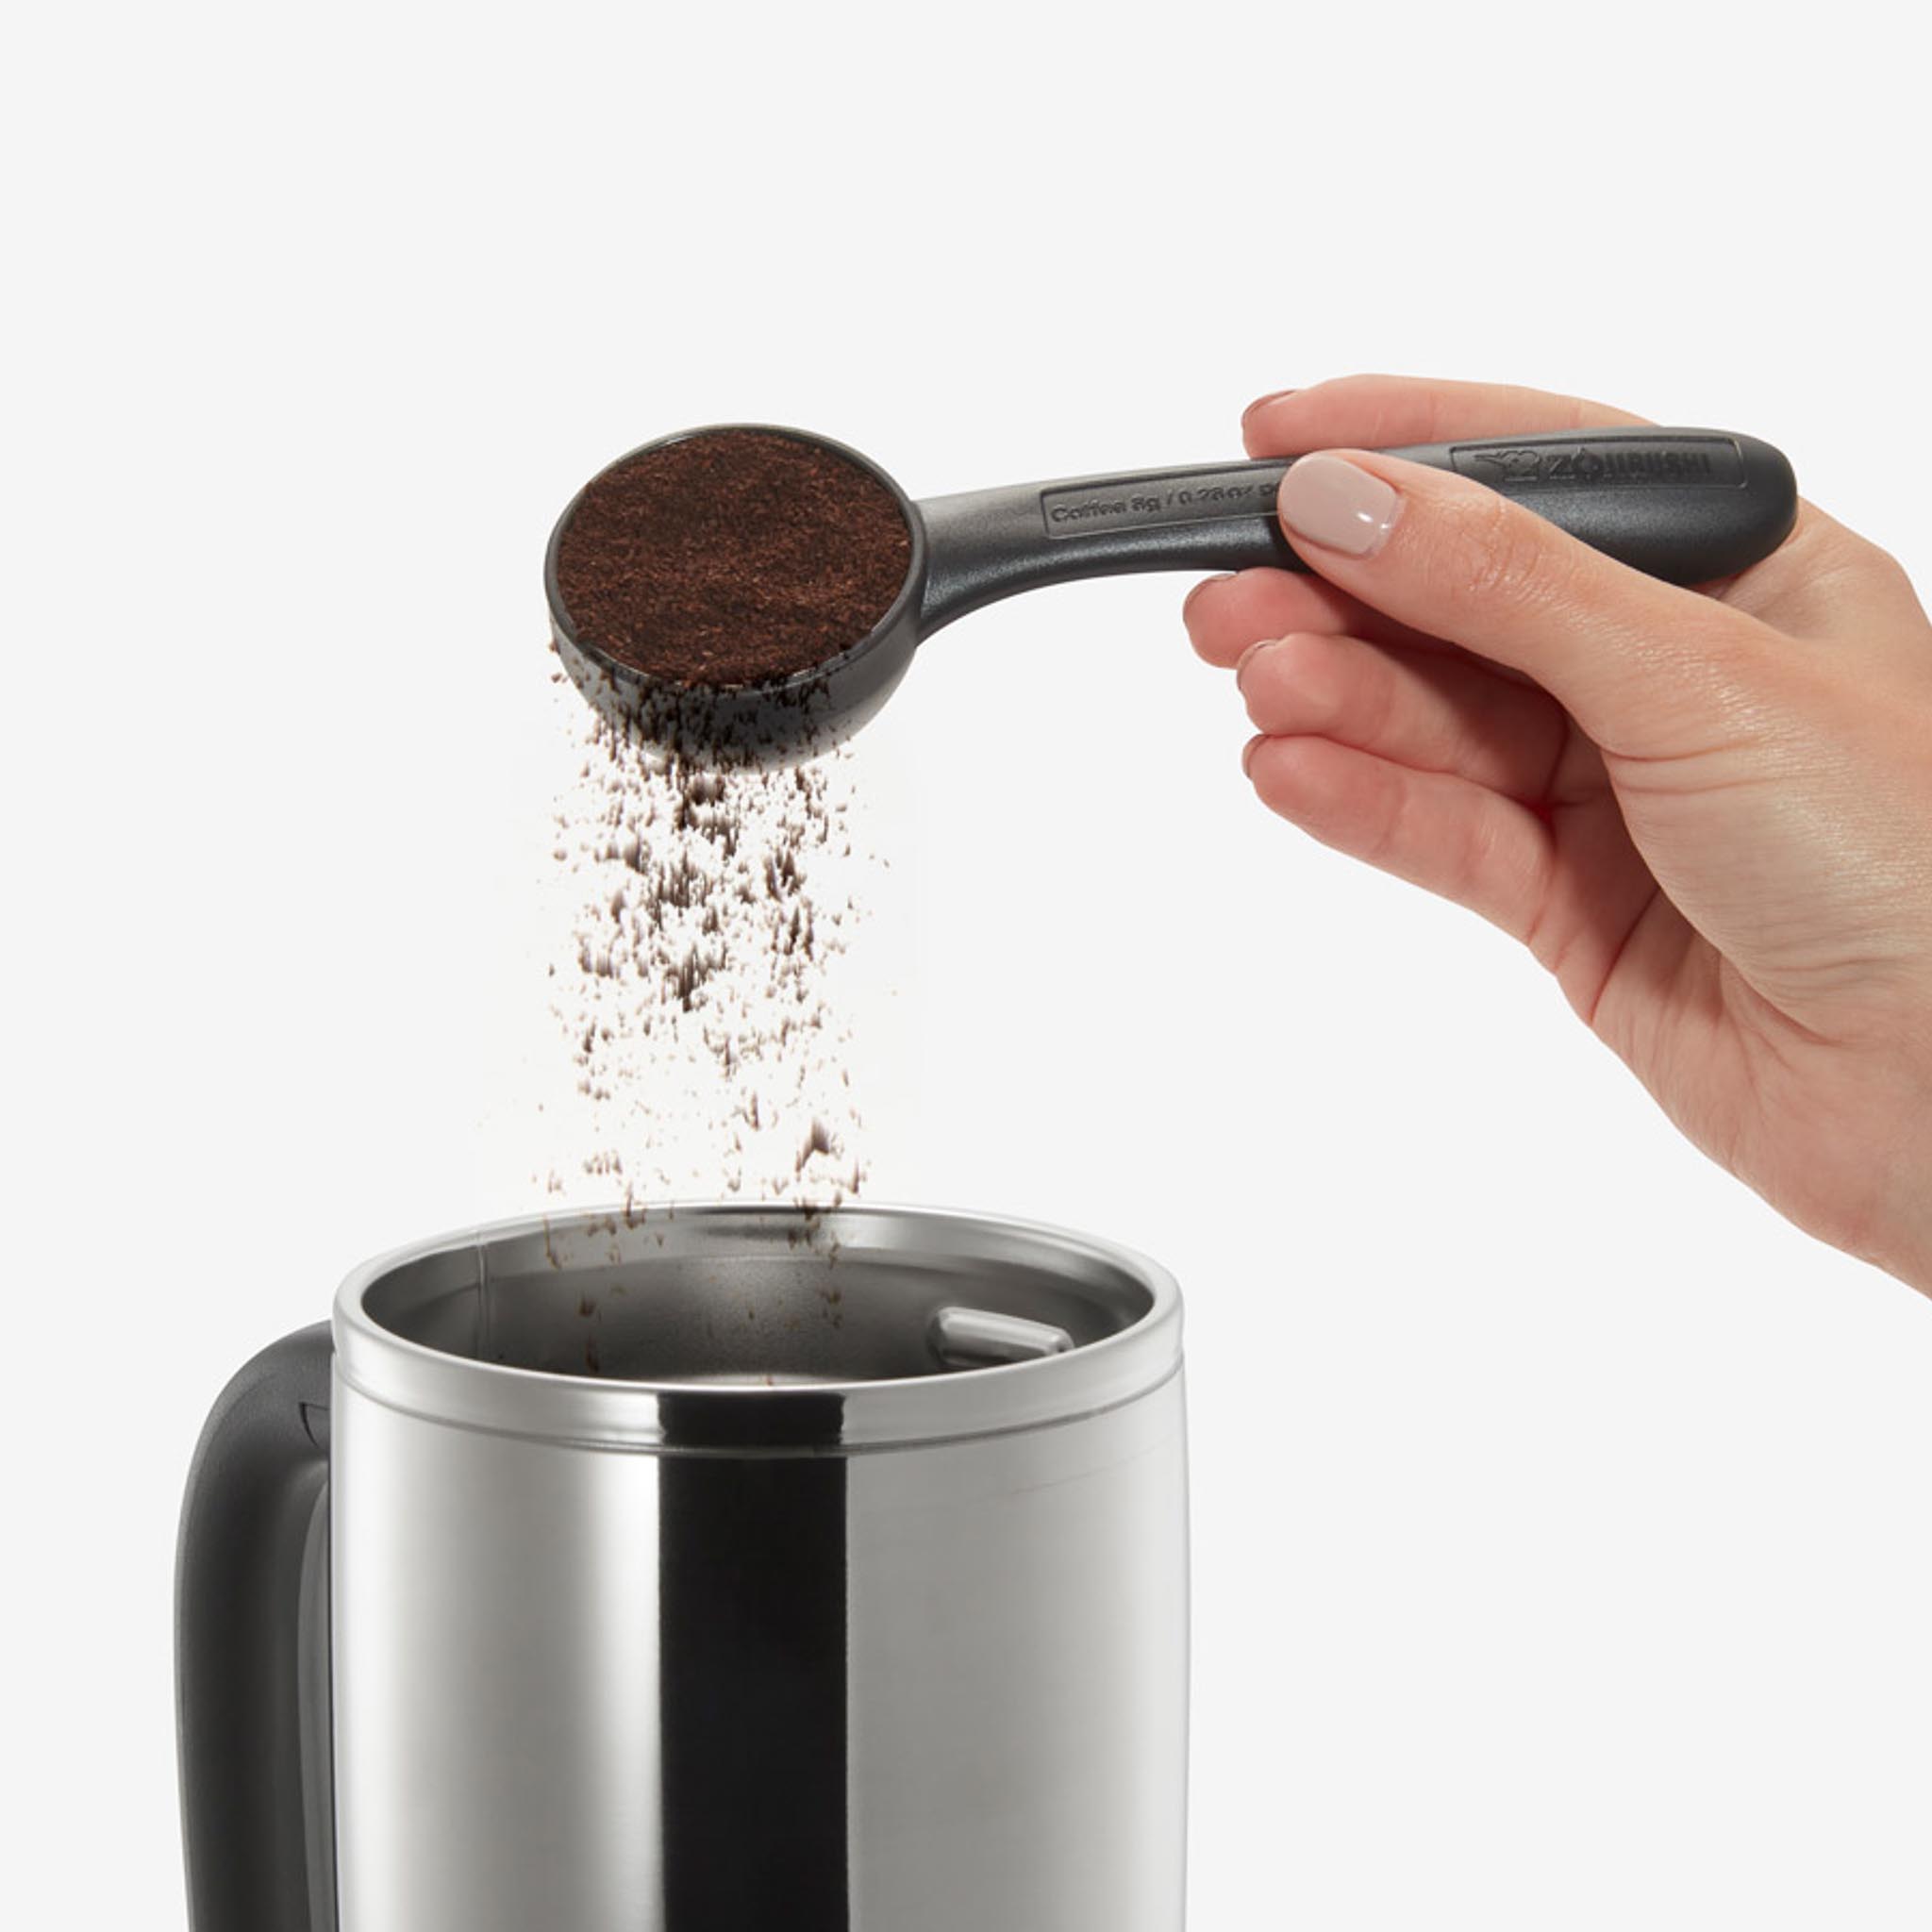 How to make delicious coffee with Coffee Maker #zojirushi